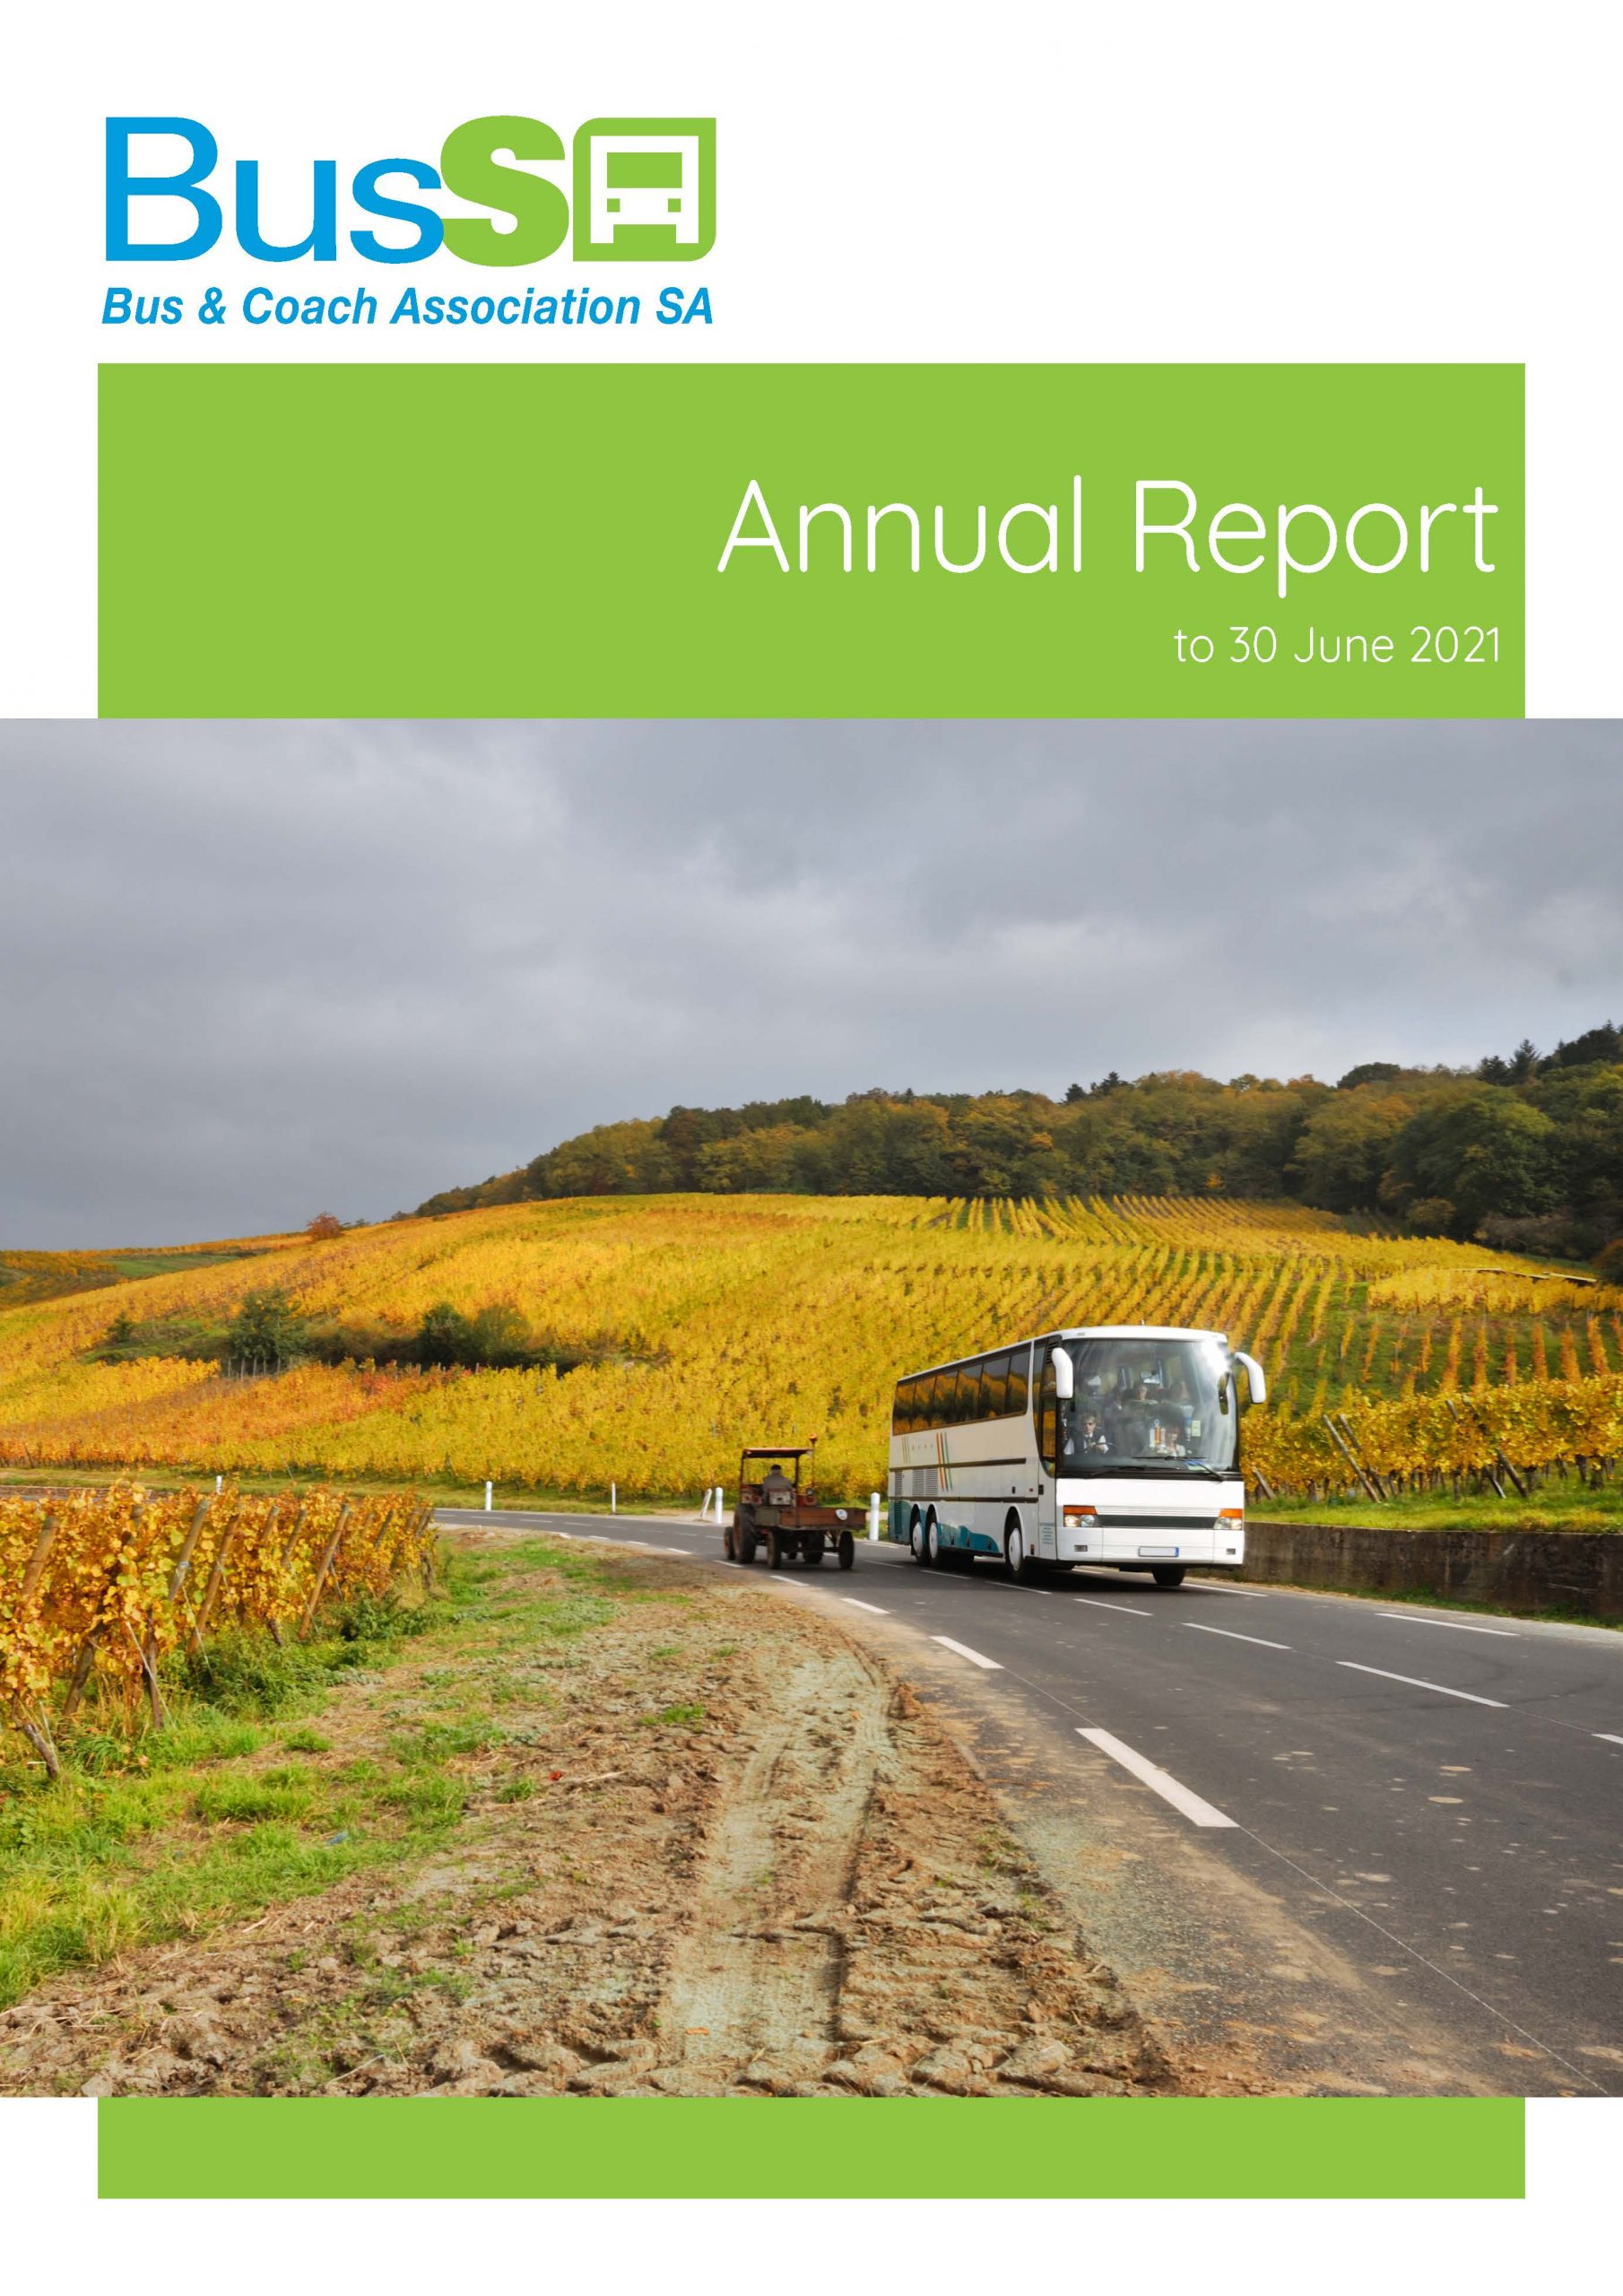 Bus SA Annual Report from page 2020-21